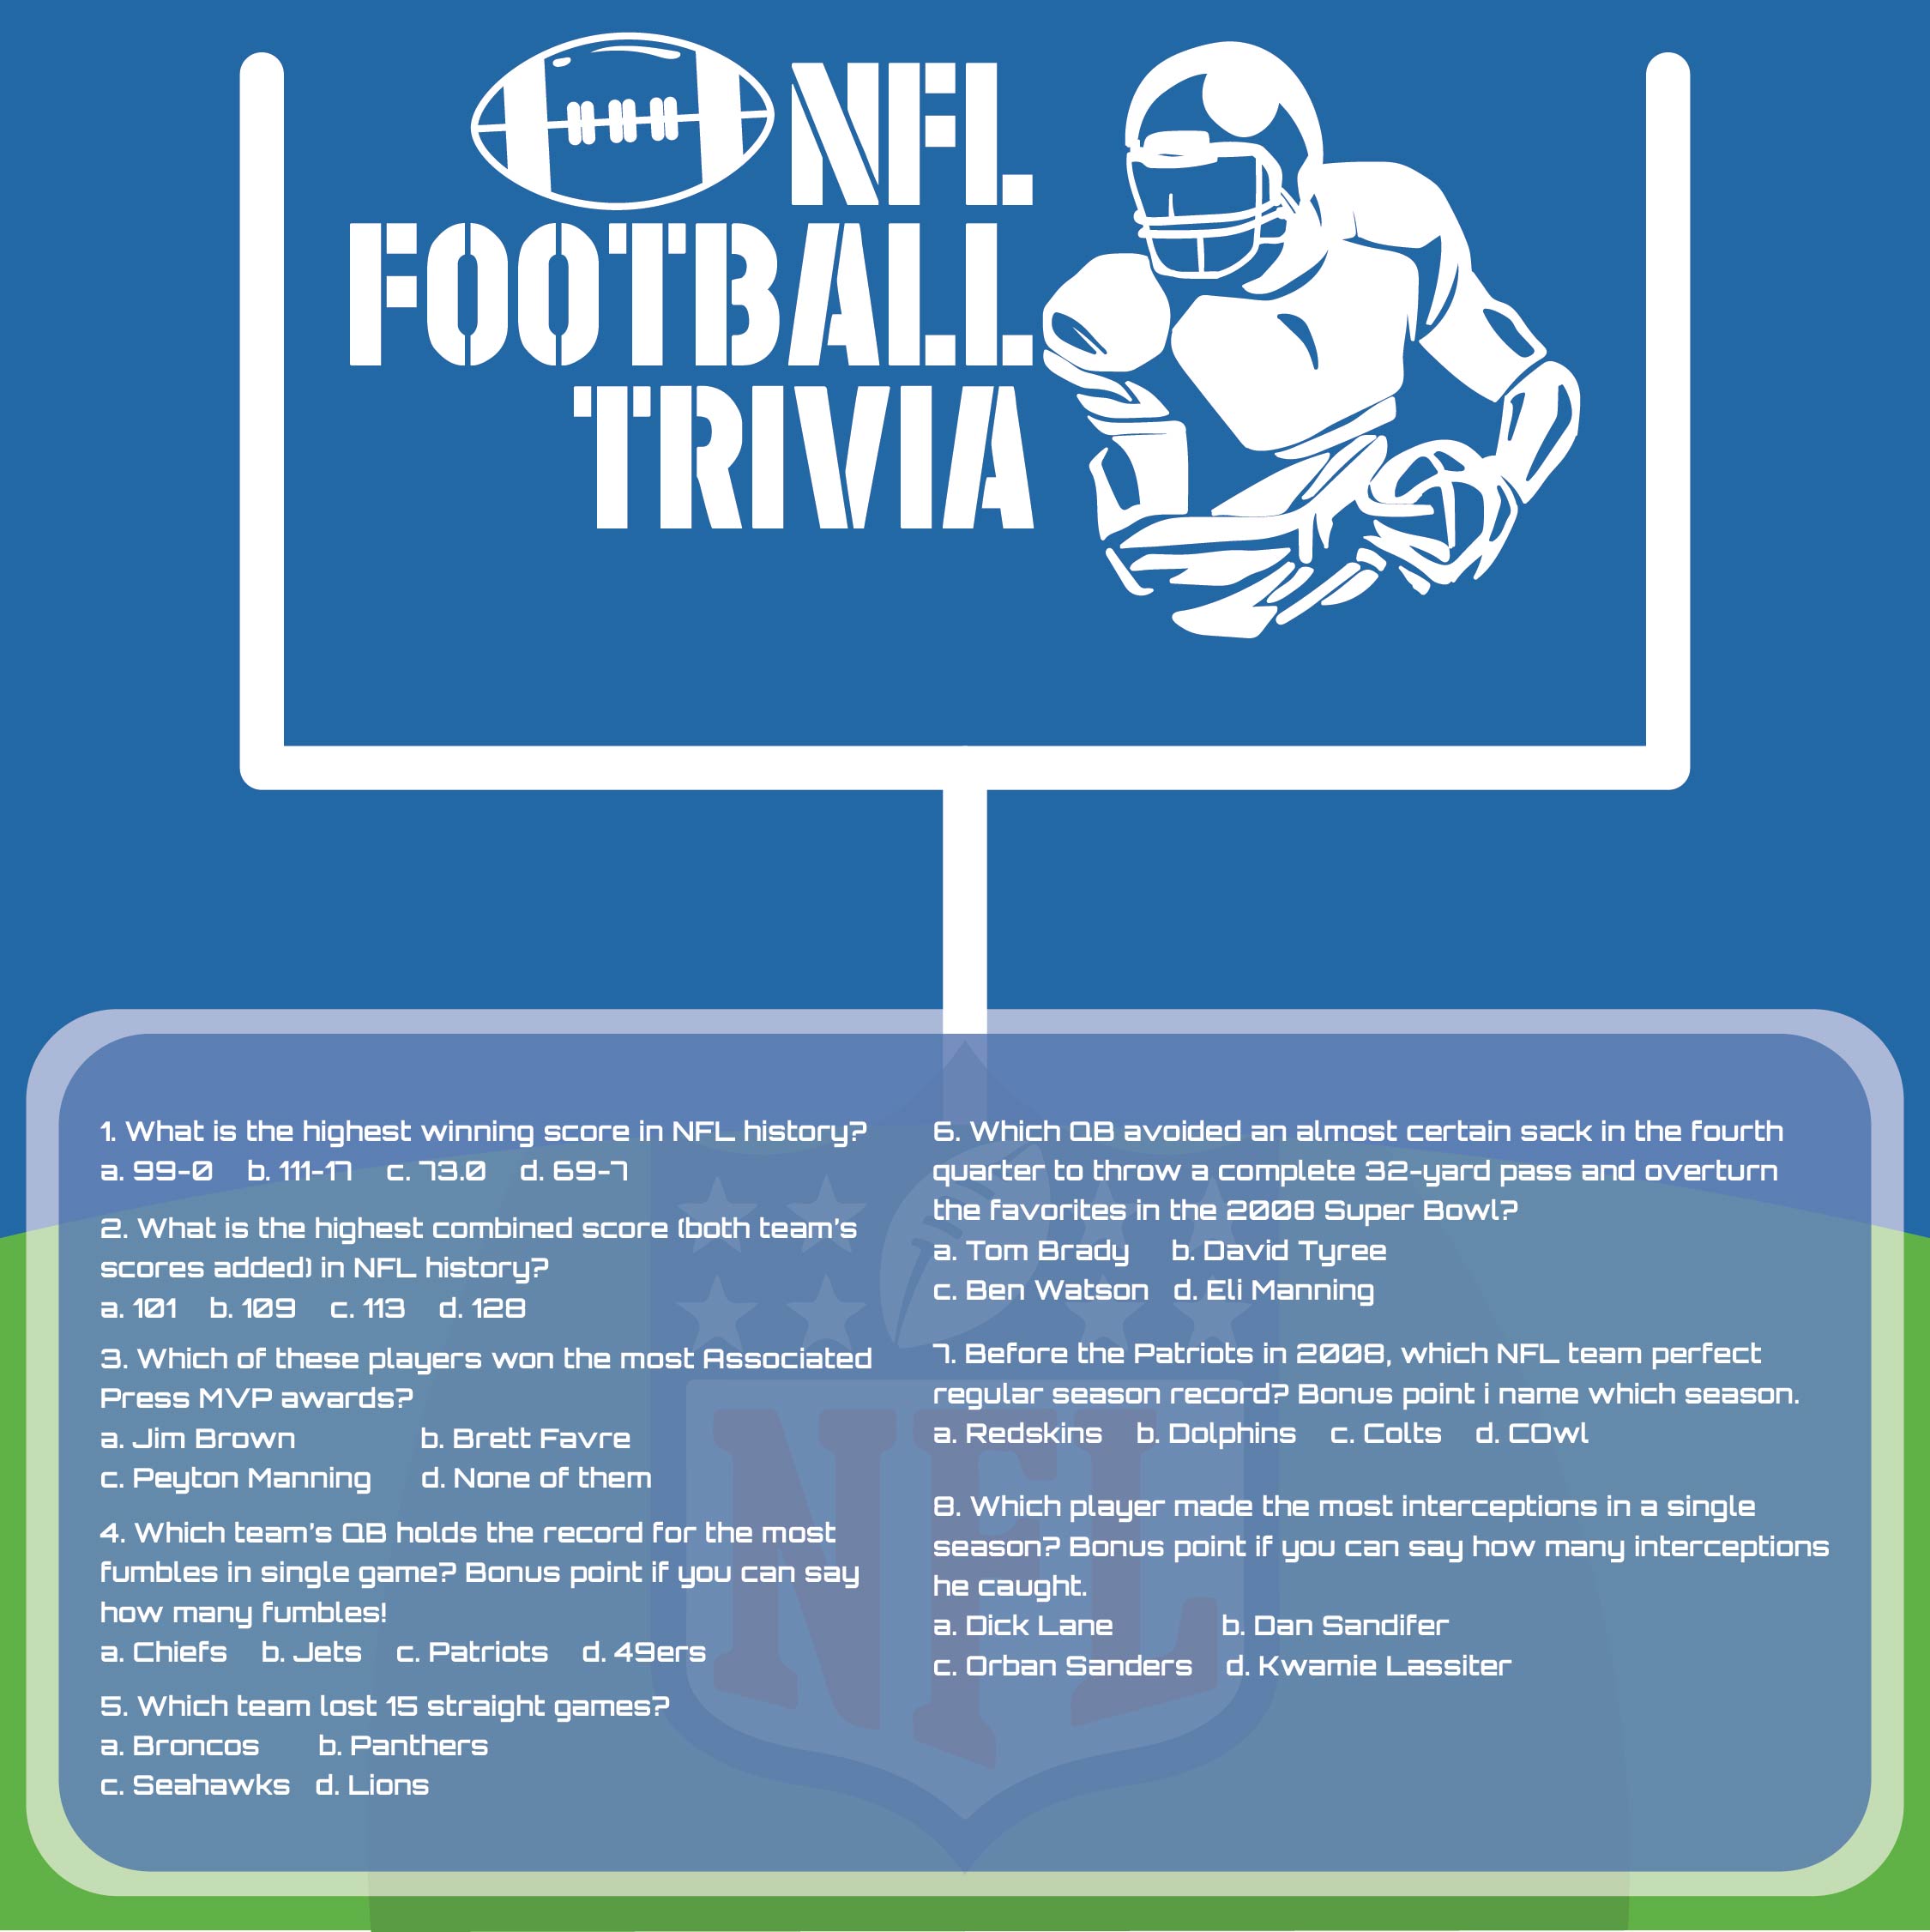 NFL Football Trivia Questions and Answers